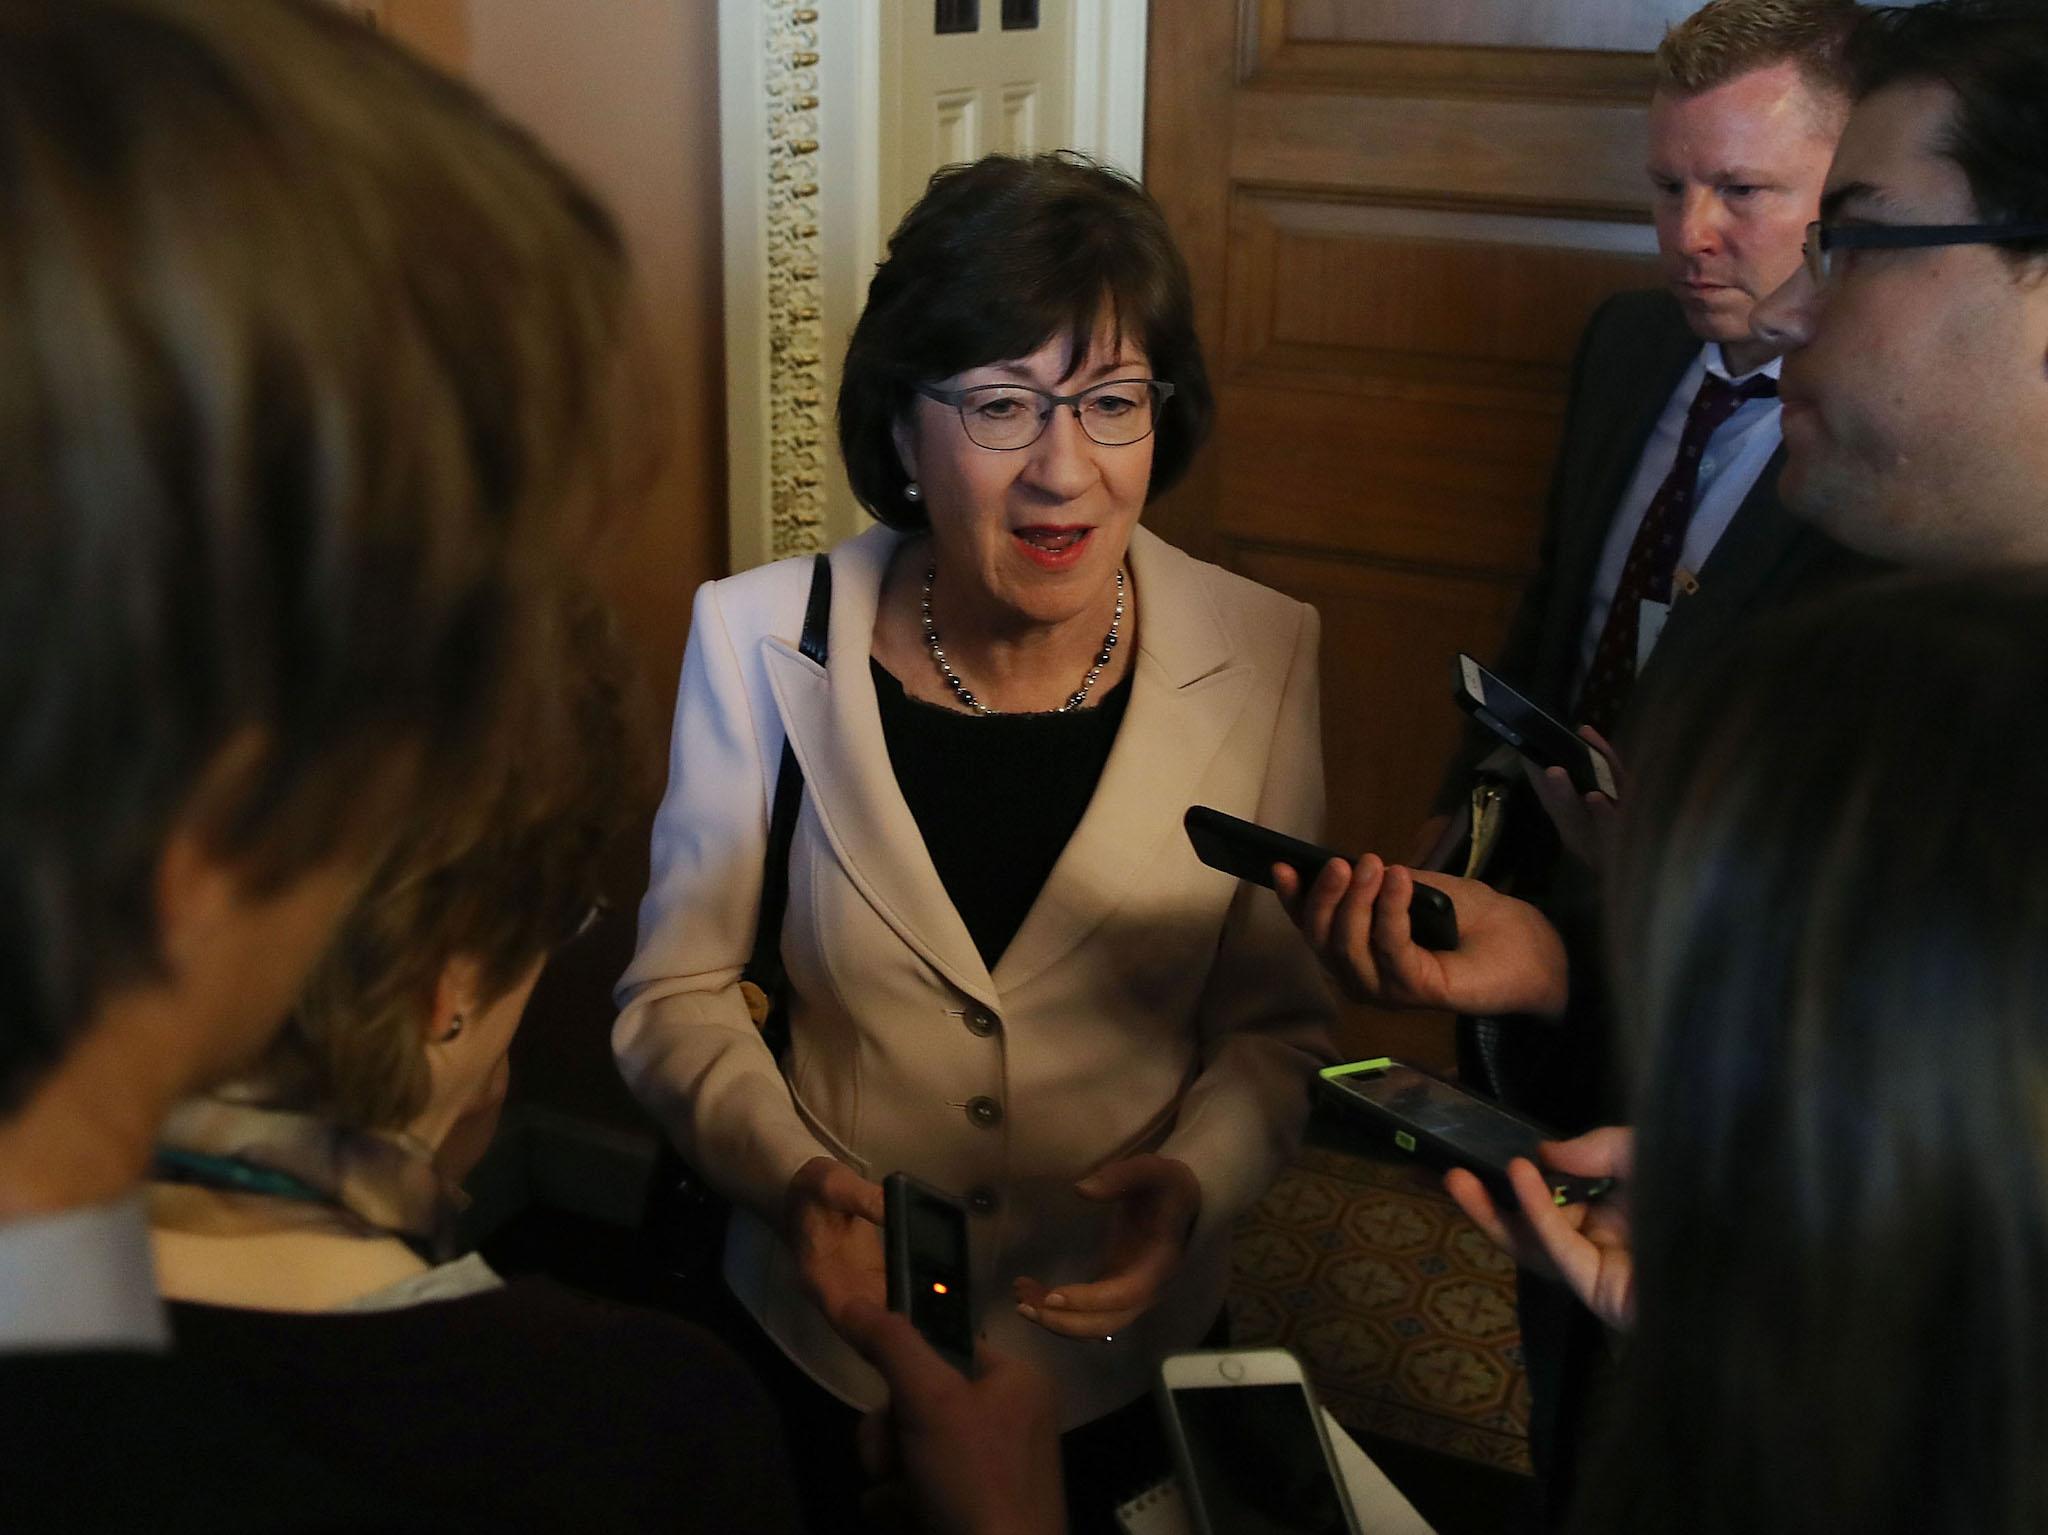 Moderate Republican Senator Susan Collins has said she will vote against a motion to proceed on the healthcare bill